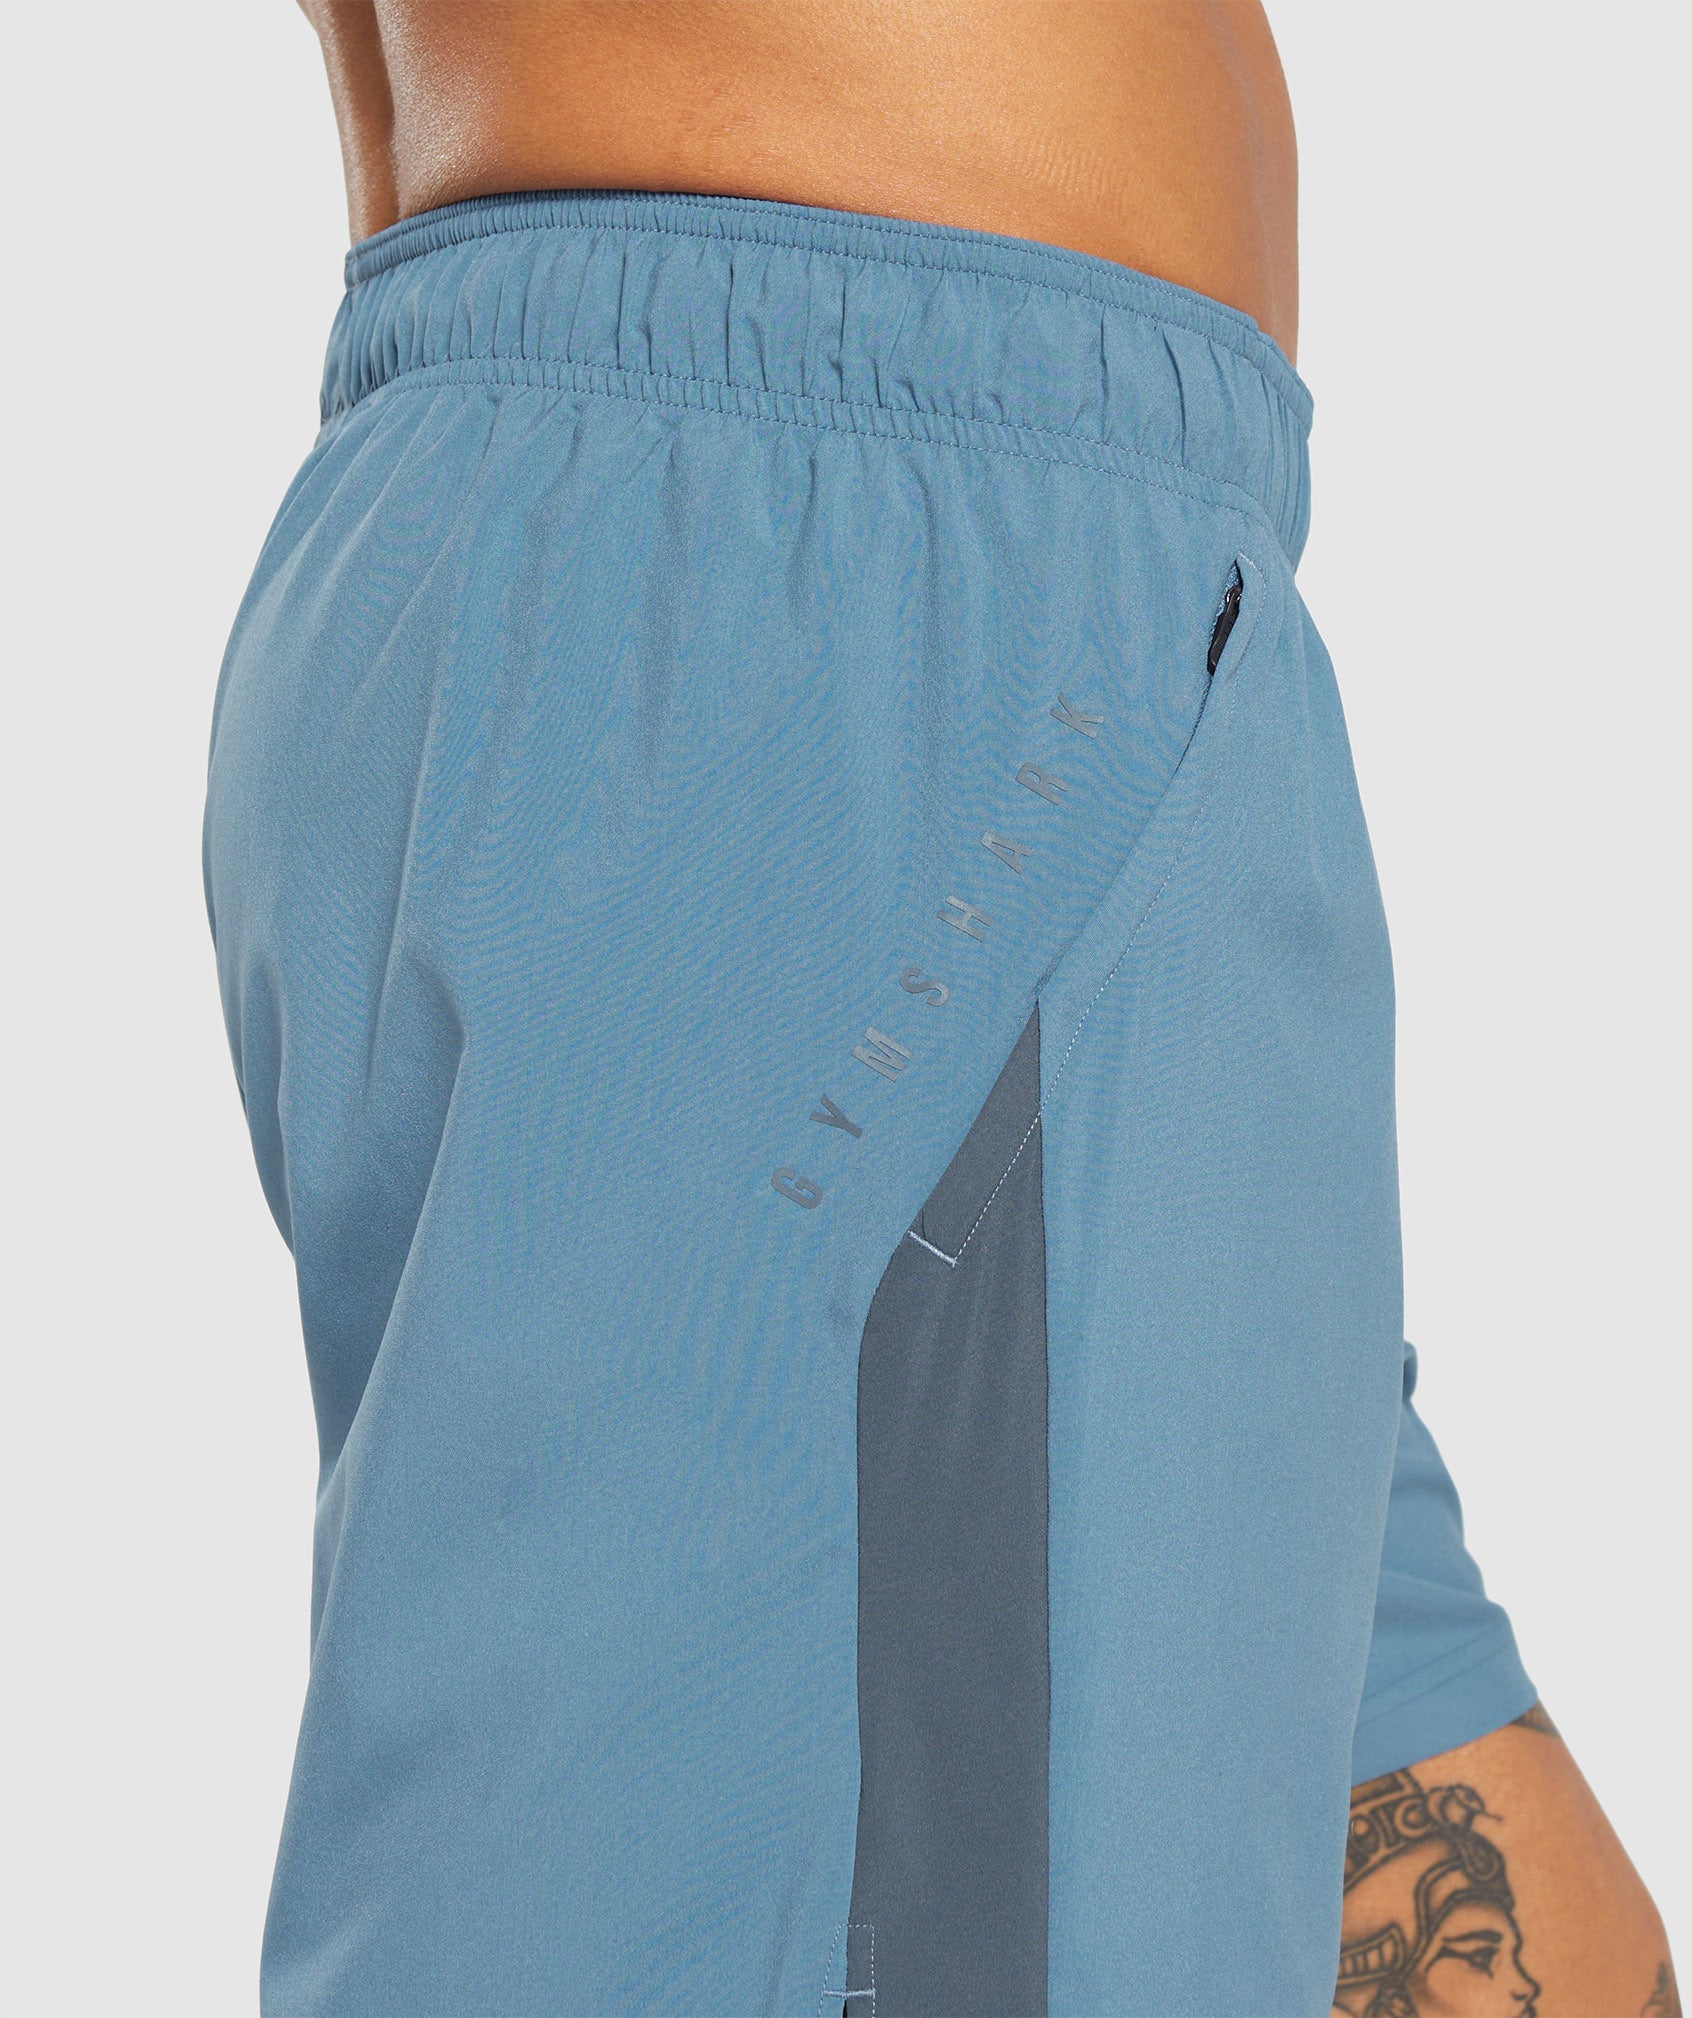 Sport 7" Shorts in Faded Blue/Titanium Blue - view 7